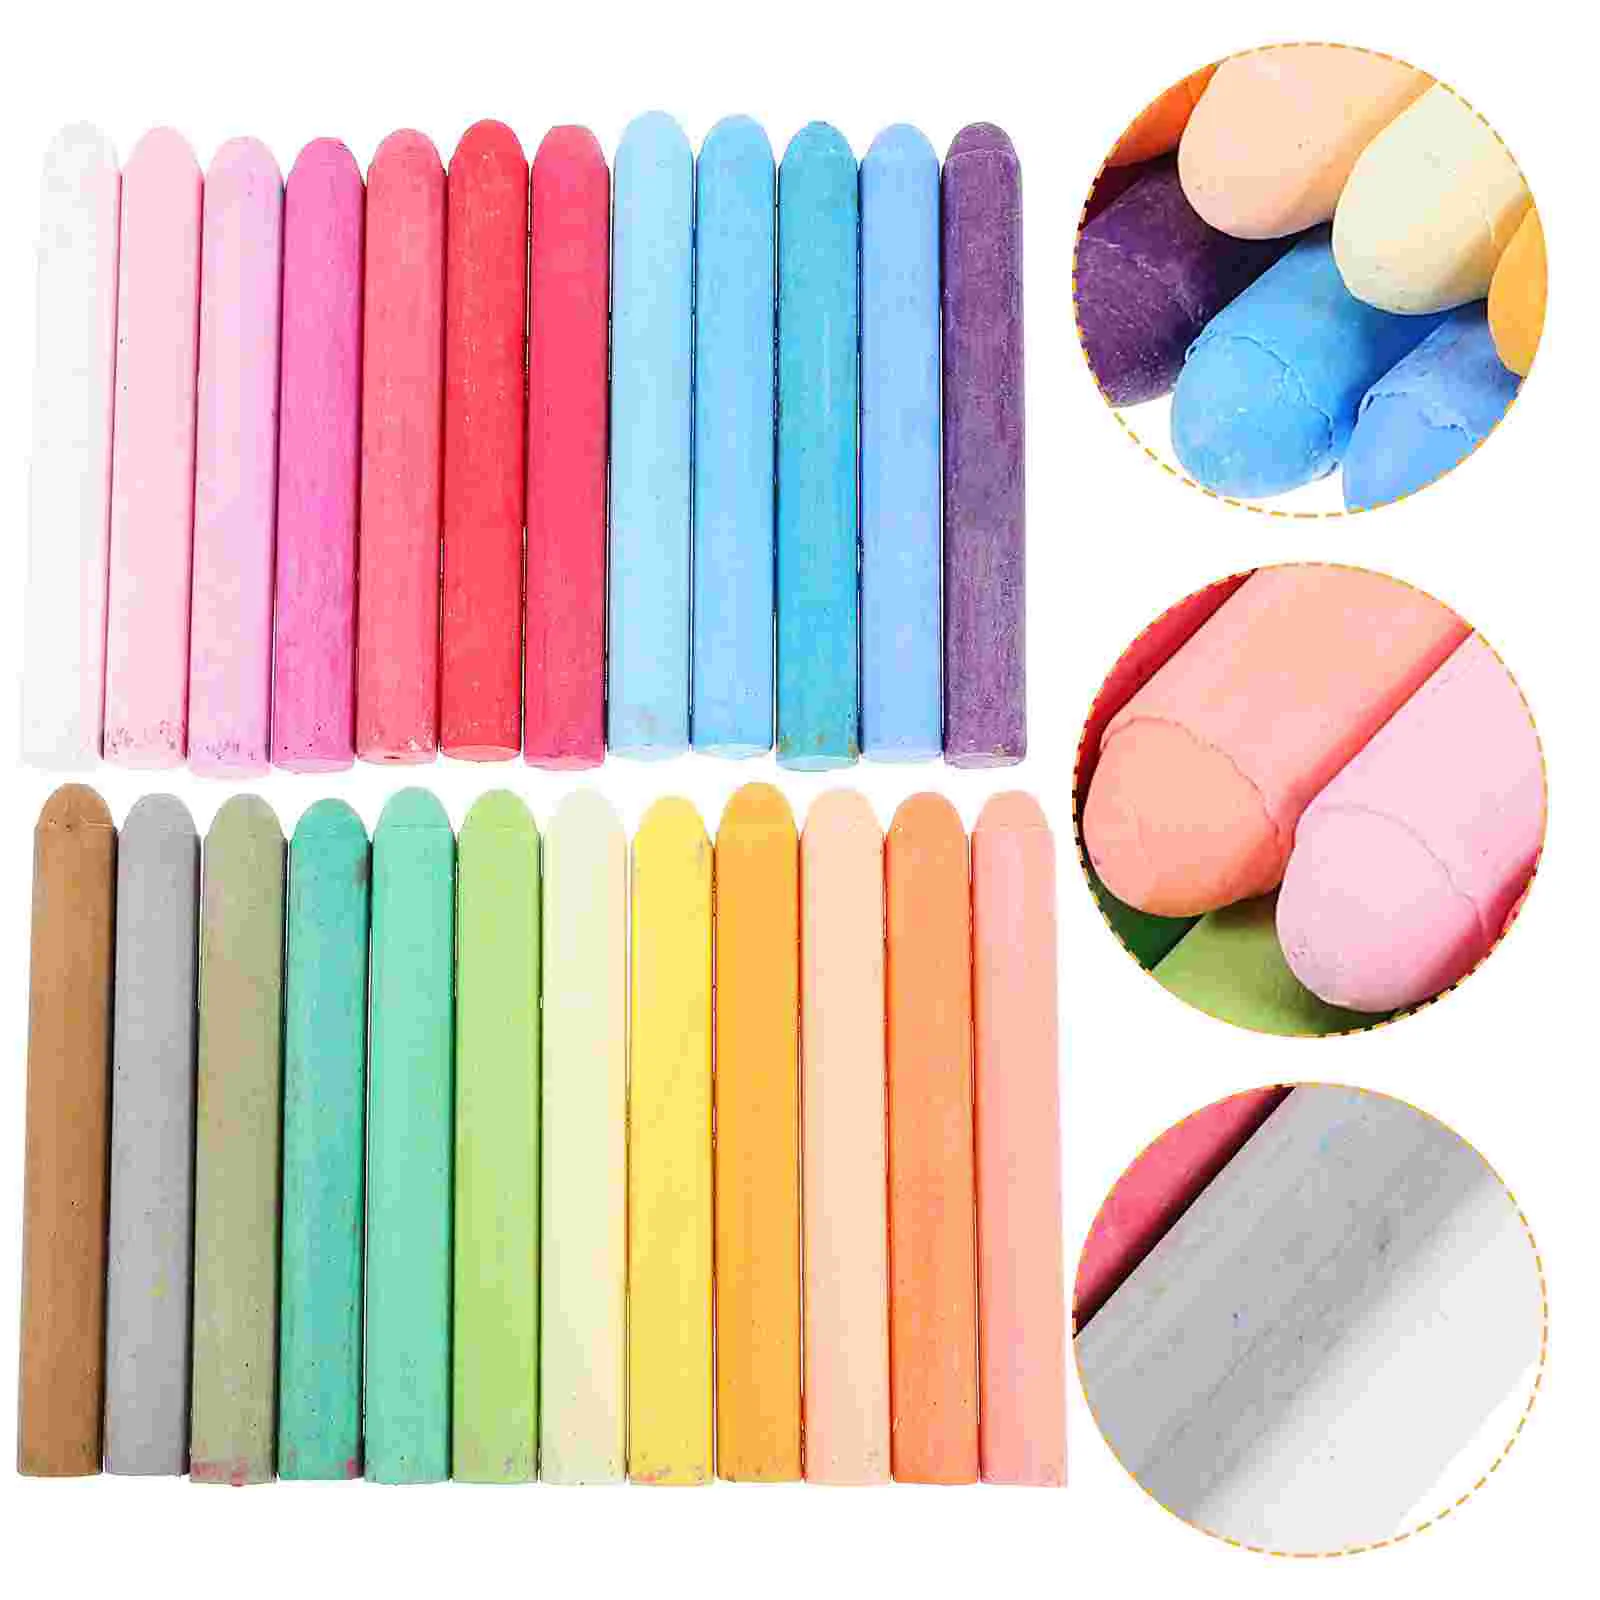 Chalks Multi-function Teacher Accessory Drawing Convenient Sidewalk Water-soluble Supply Portable Pens